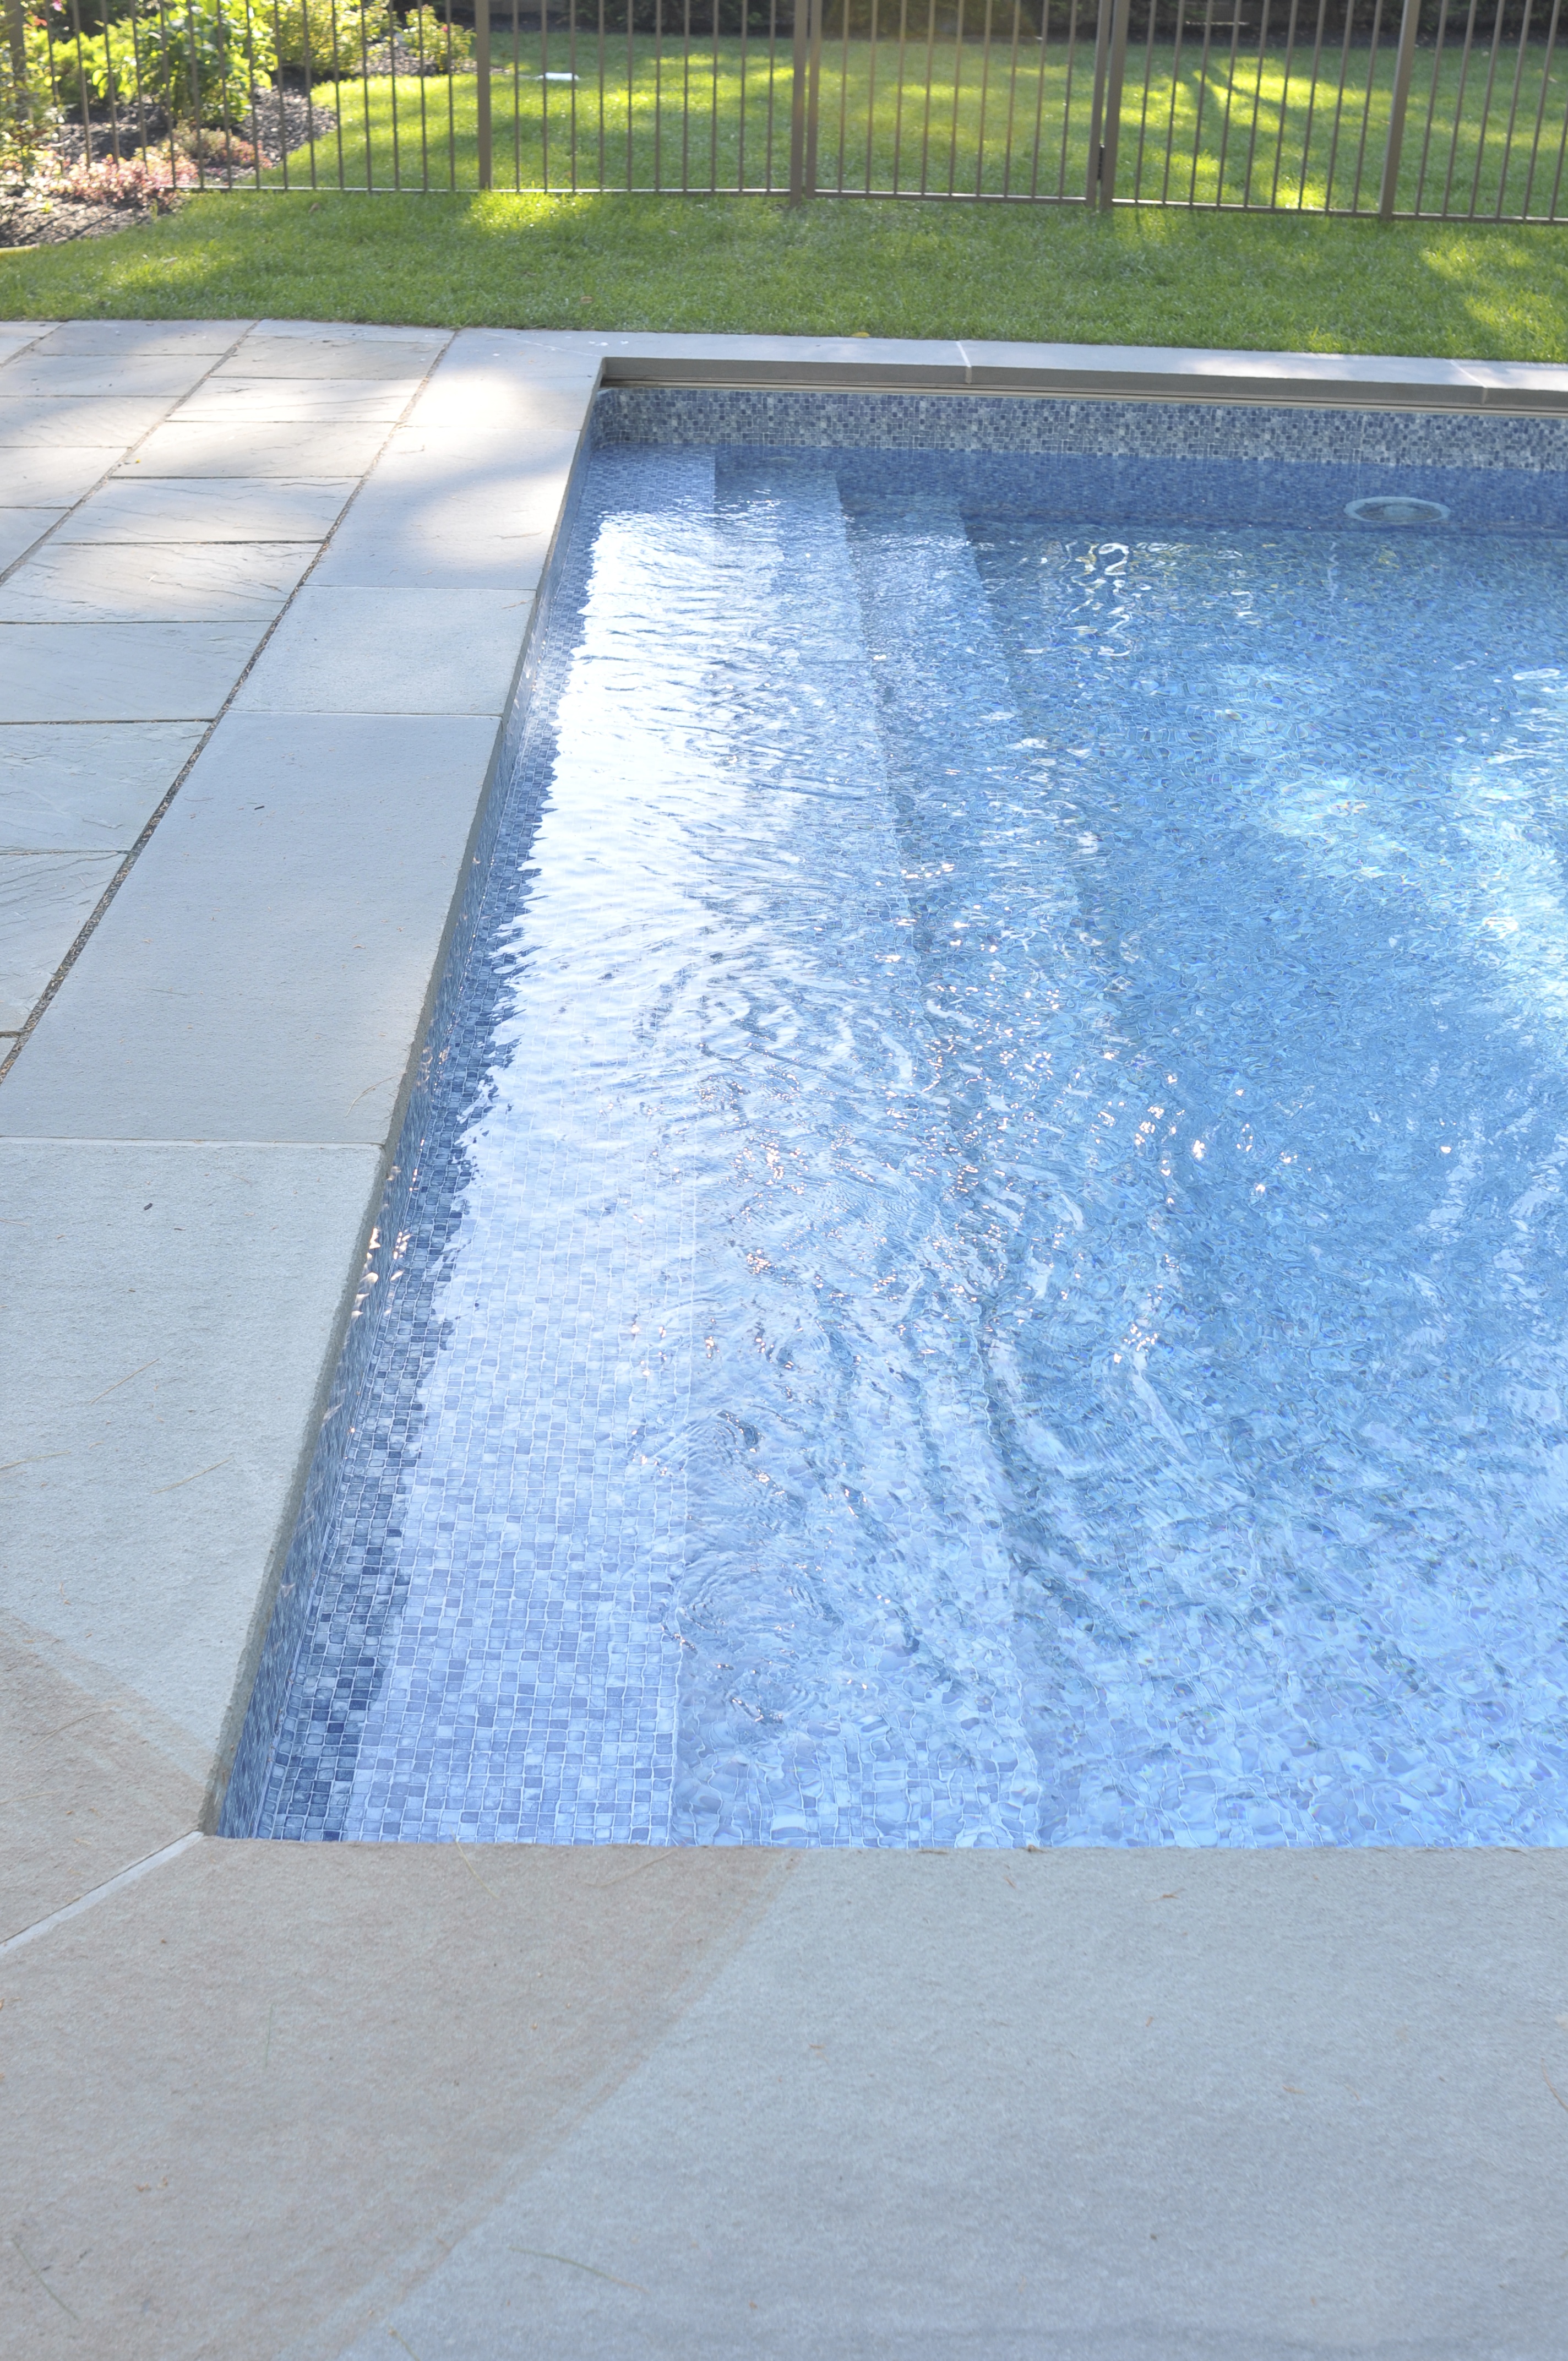 Swimming Pool Features - Westrock Pool & Spa in Rockland County, NY